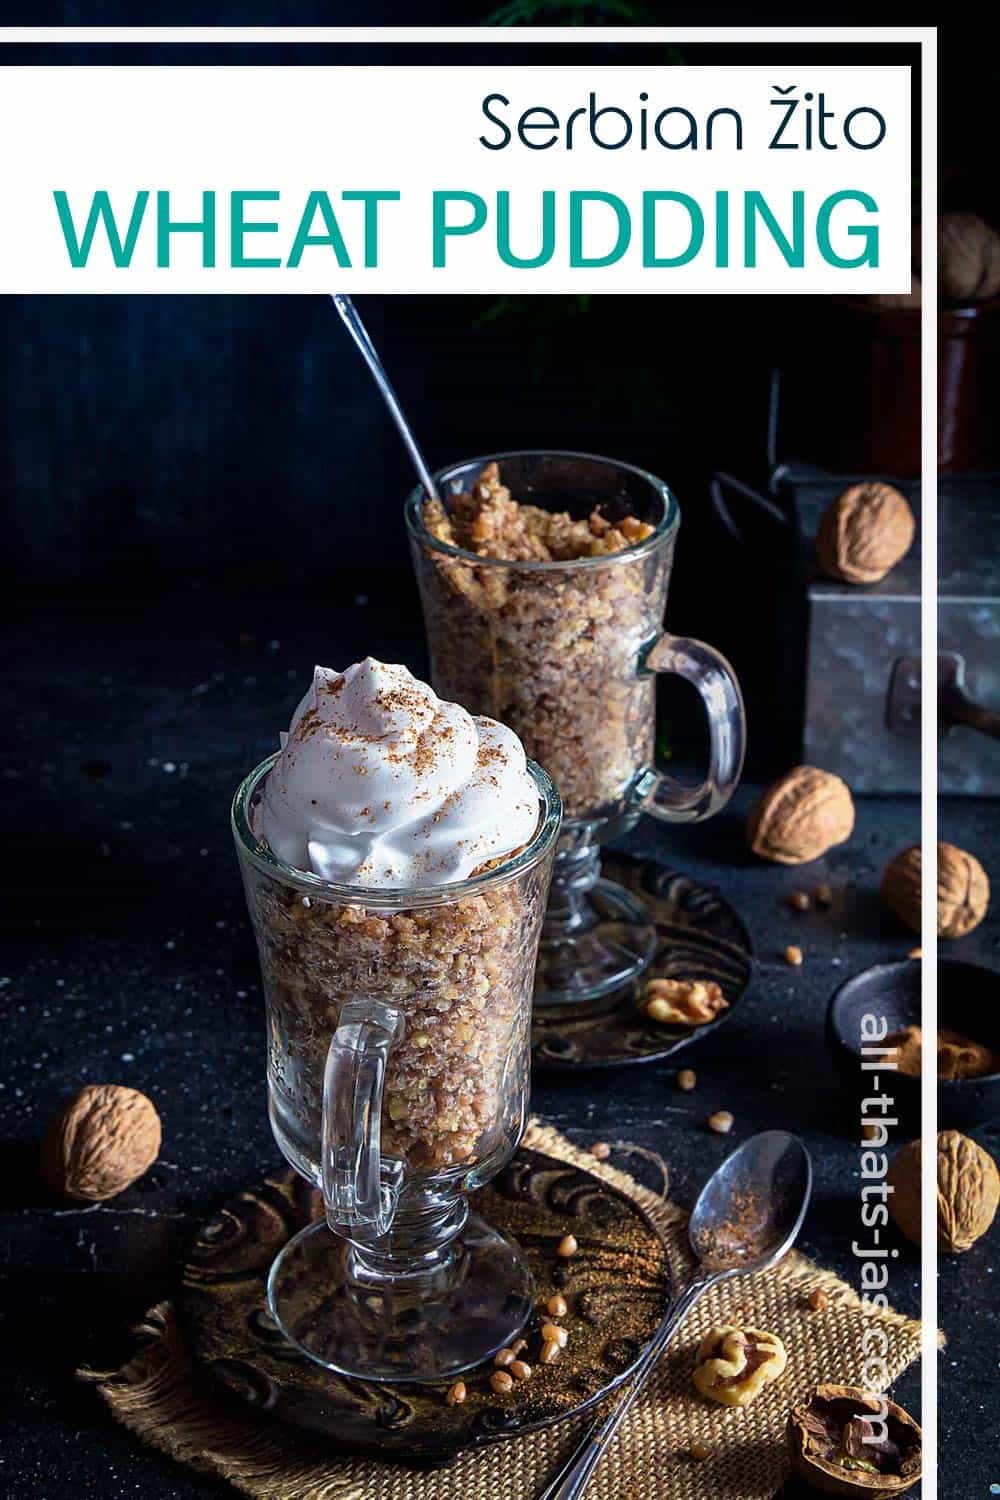 Two glasses with whole grain pudding and text overlay.